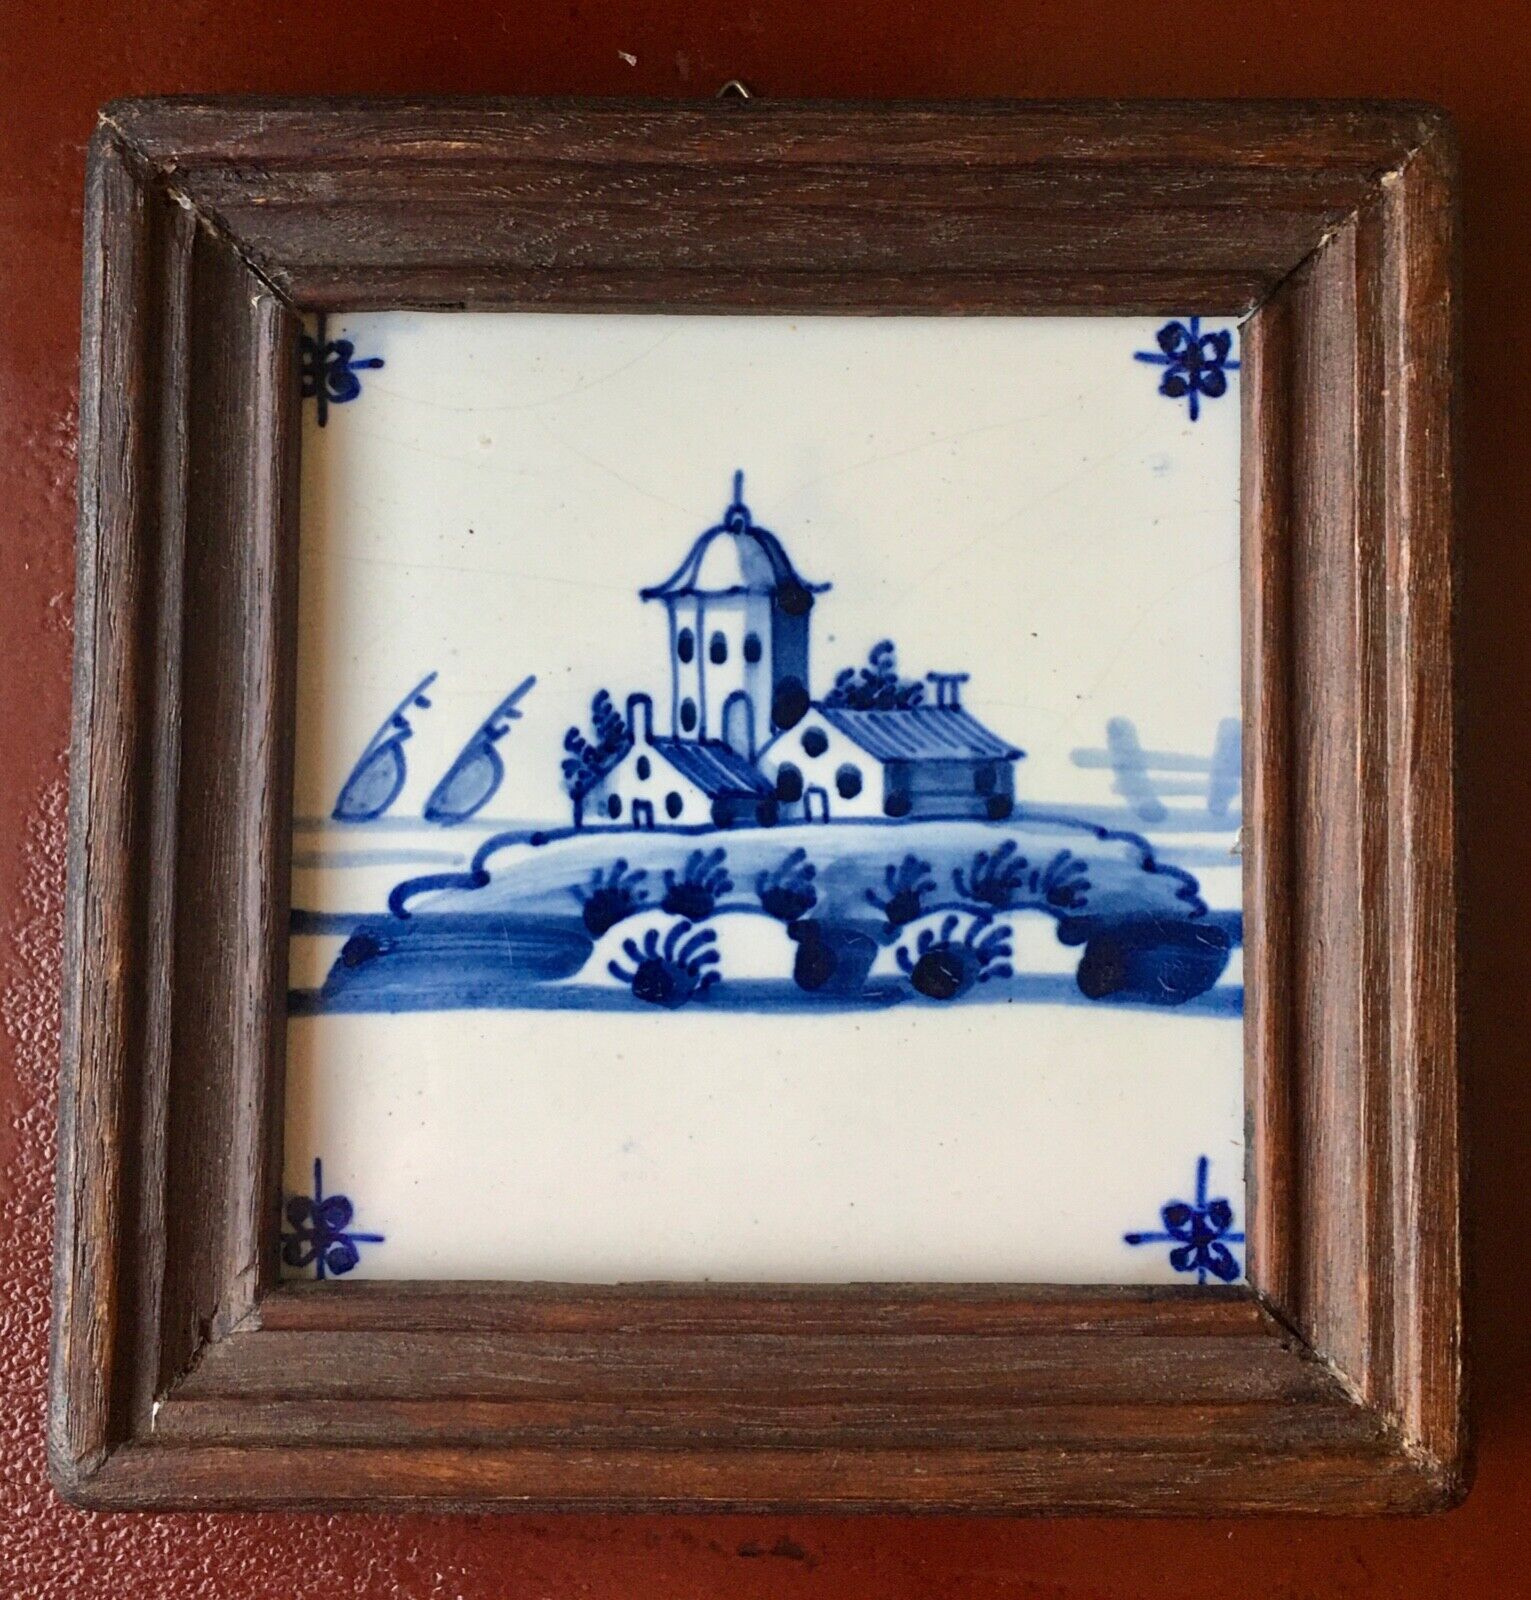 Antique Dutch Delft Blue & White Faience Tile in Carved Wood Frame